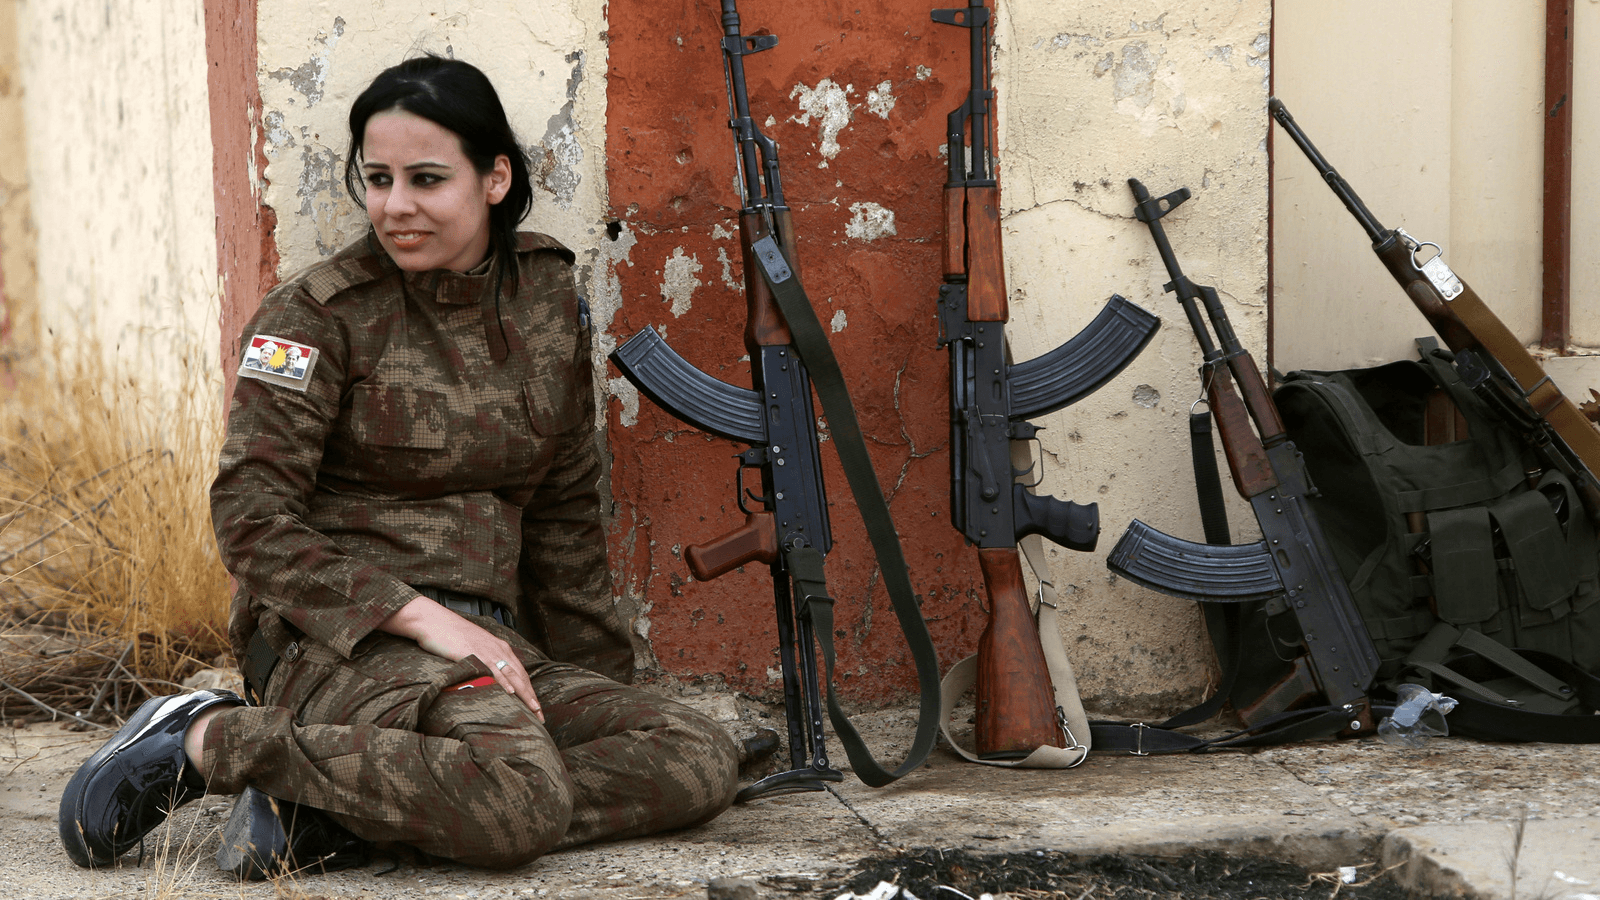 A Yazidi woman who joined the Kurdish Peshmerga forces sits next to rifles in the town of Bashiqa, after it was recaptured from the Islamic State, east of Mosul, Iraq Nov. 10, 2016.